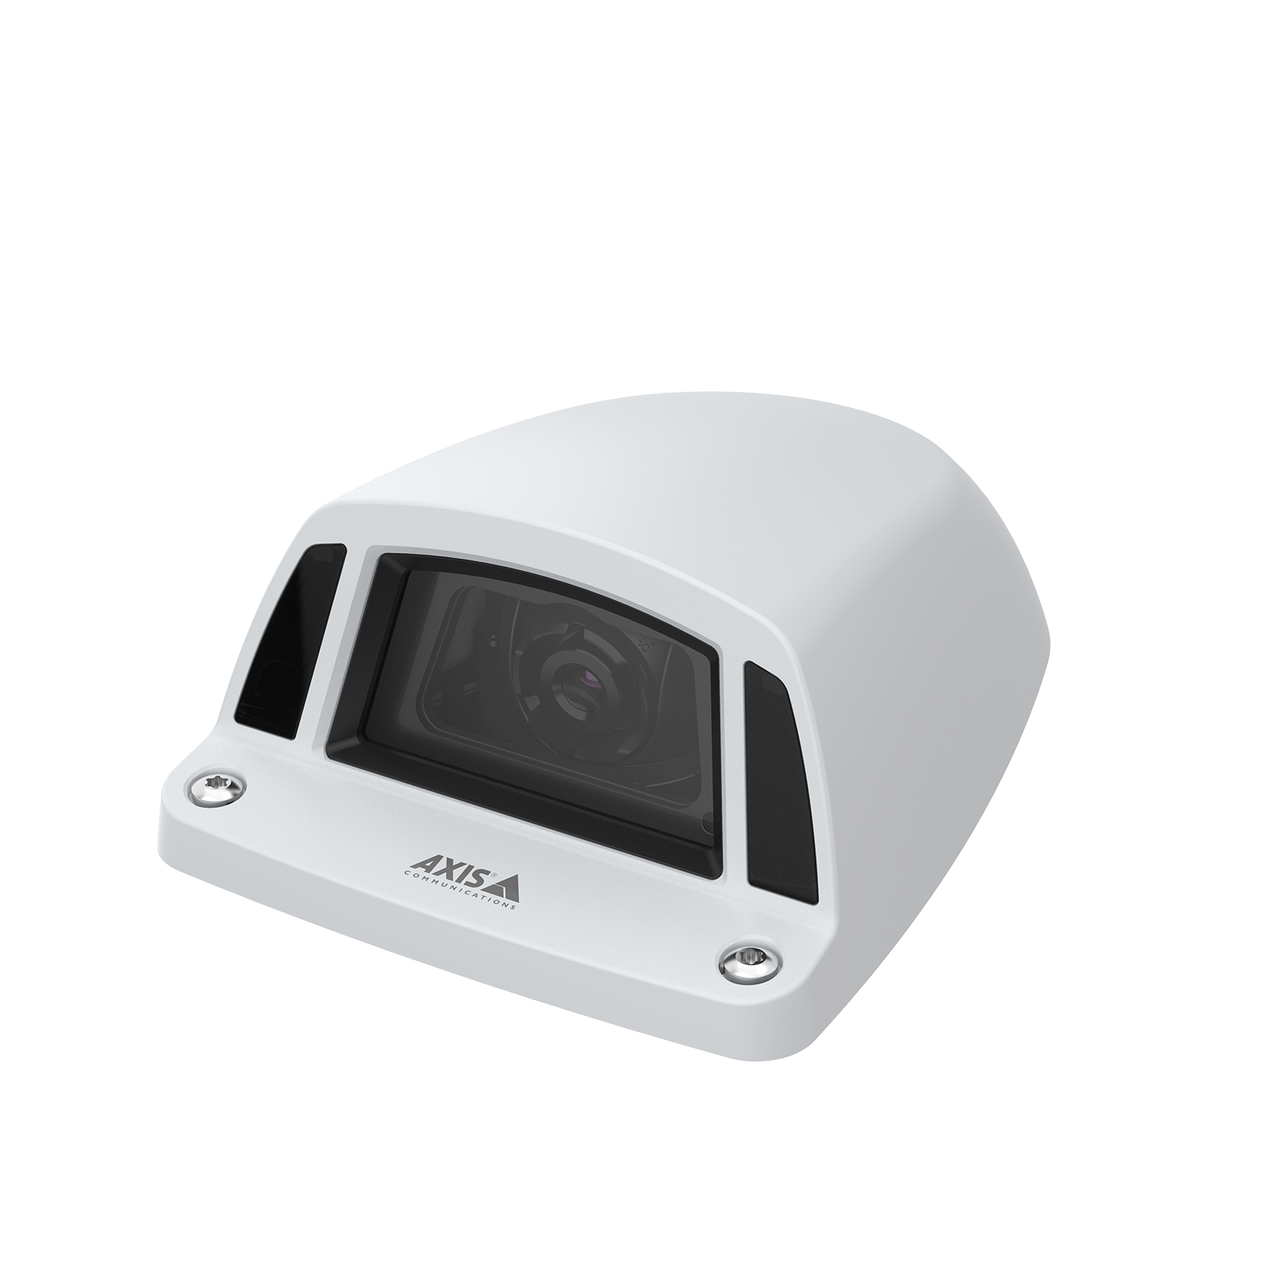 AXIS P3925-LRE Onboard camera – for exterior use in any light